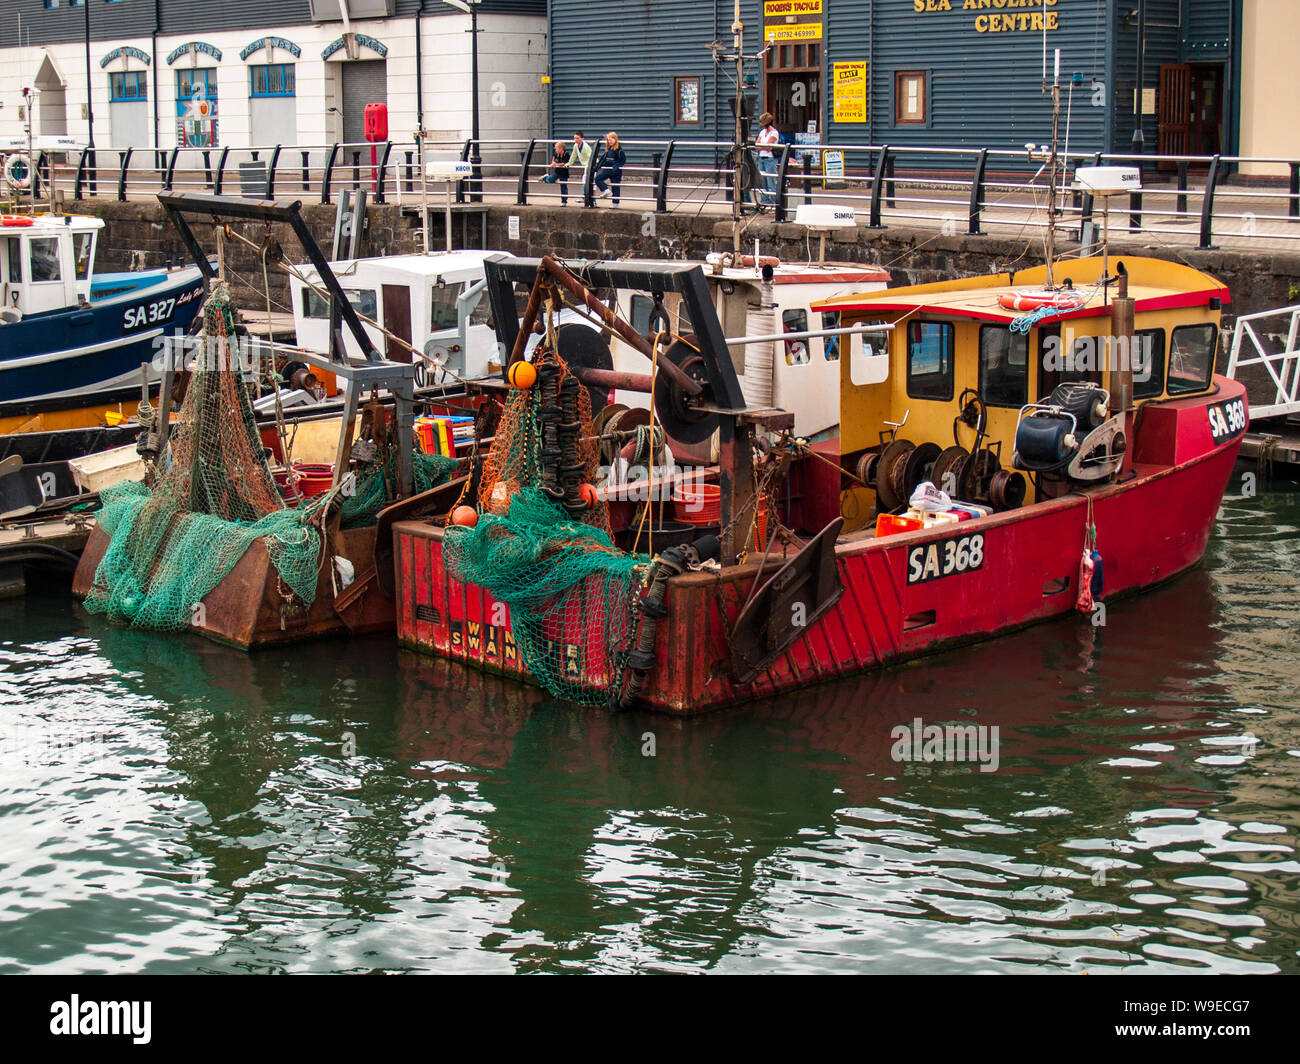 Swansea marina. Fishing boats are tied up at the dock. Fishing equipment and nets can be seen on the boats. Wales, UK. Stock Photo